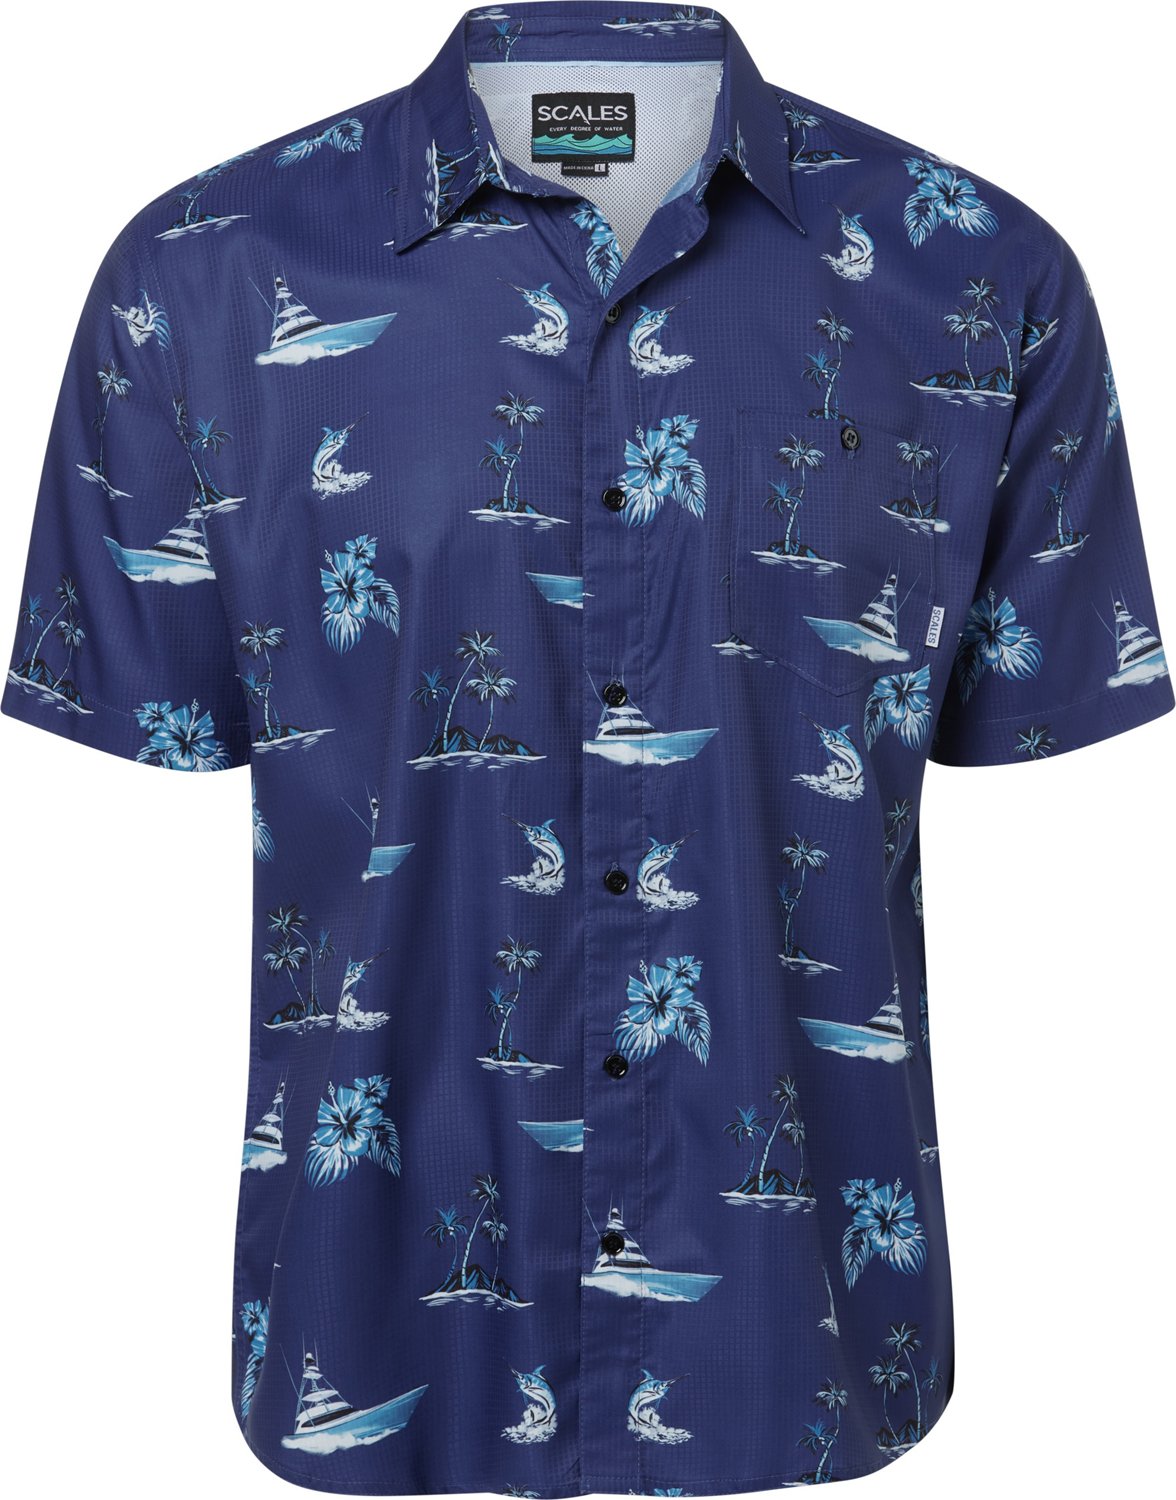 SCALES Men's Sporty Button Down Shirt | Academy